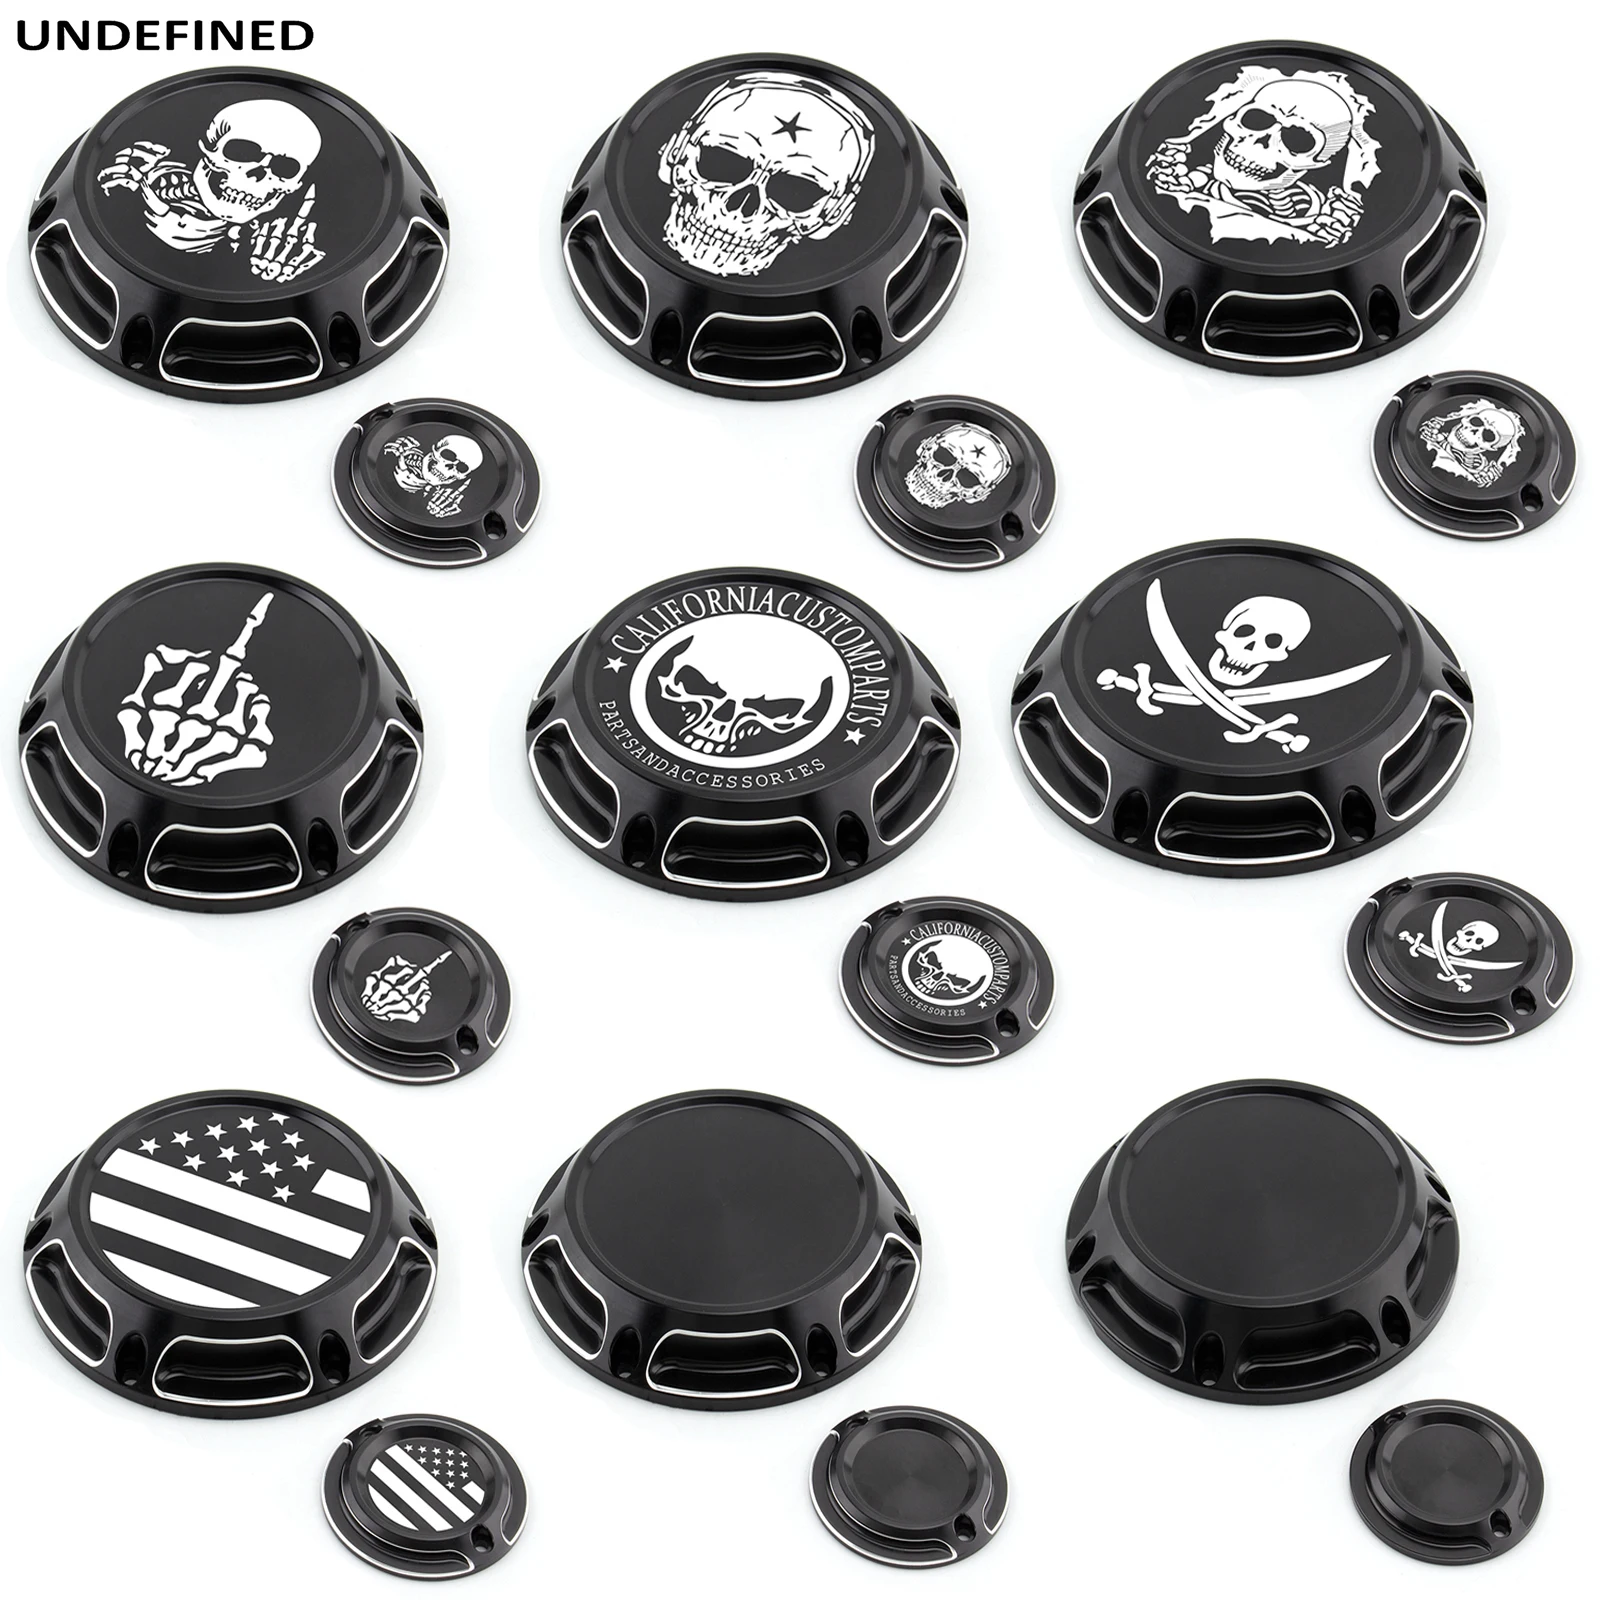 

Motorcycle Aluminum Derby Cover Timing Timer Cover For Harley Sportster 883 1200 XL XR Iron 883 48 72 Custom Nightster 2004-2022